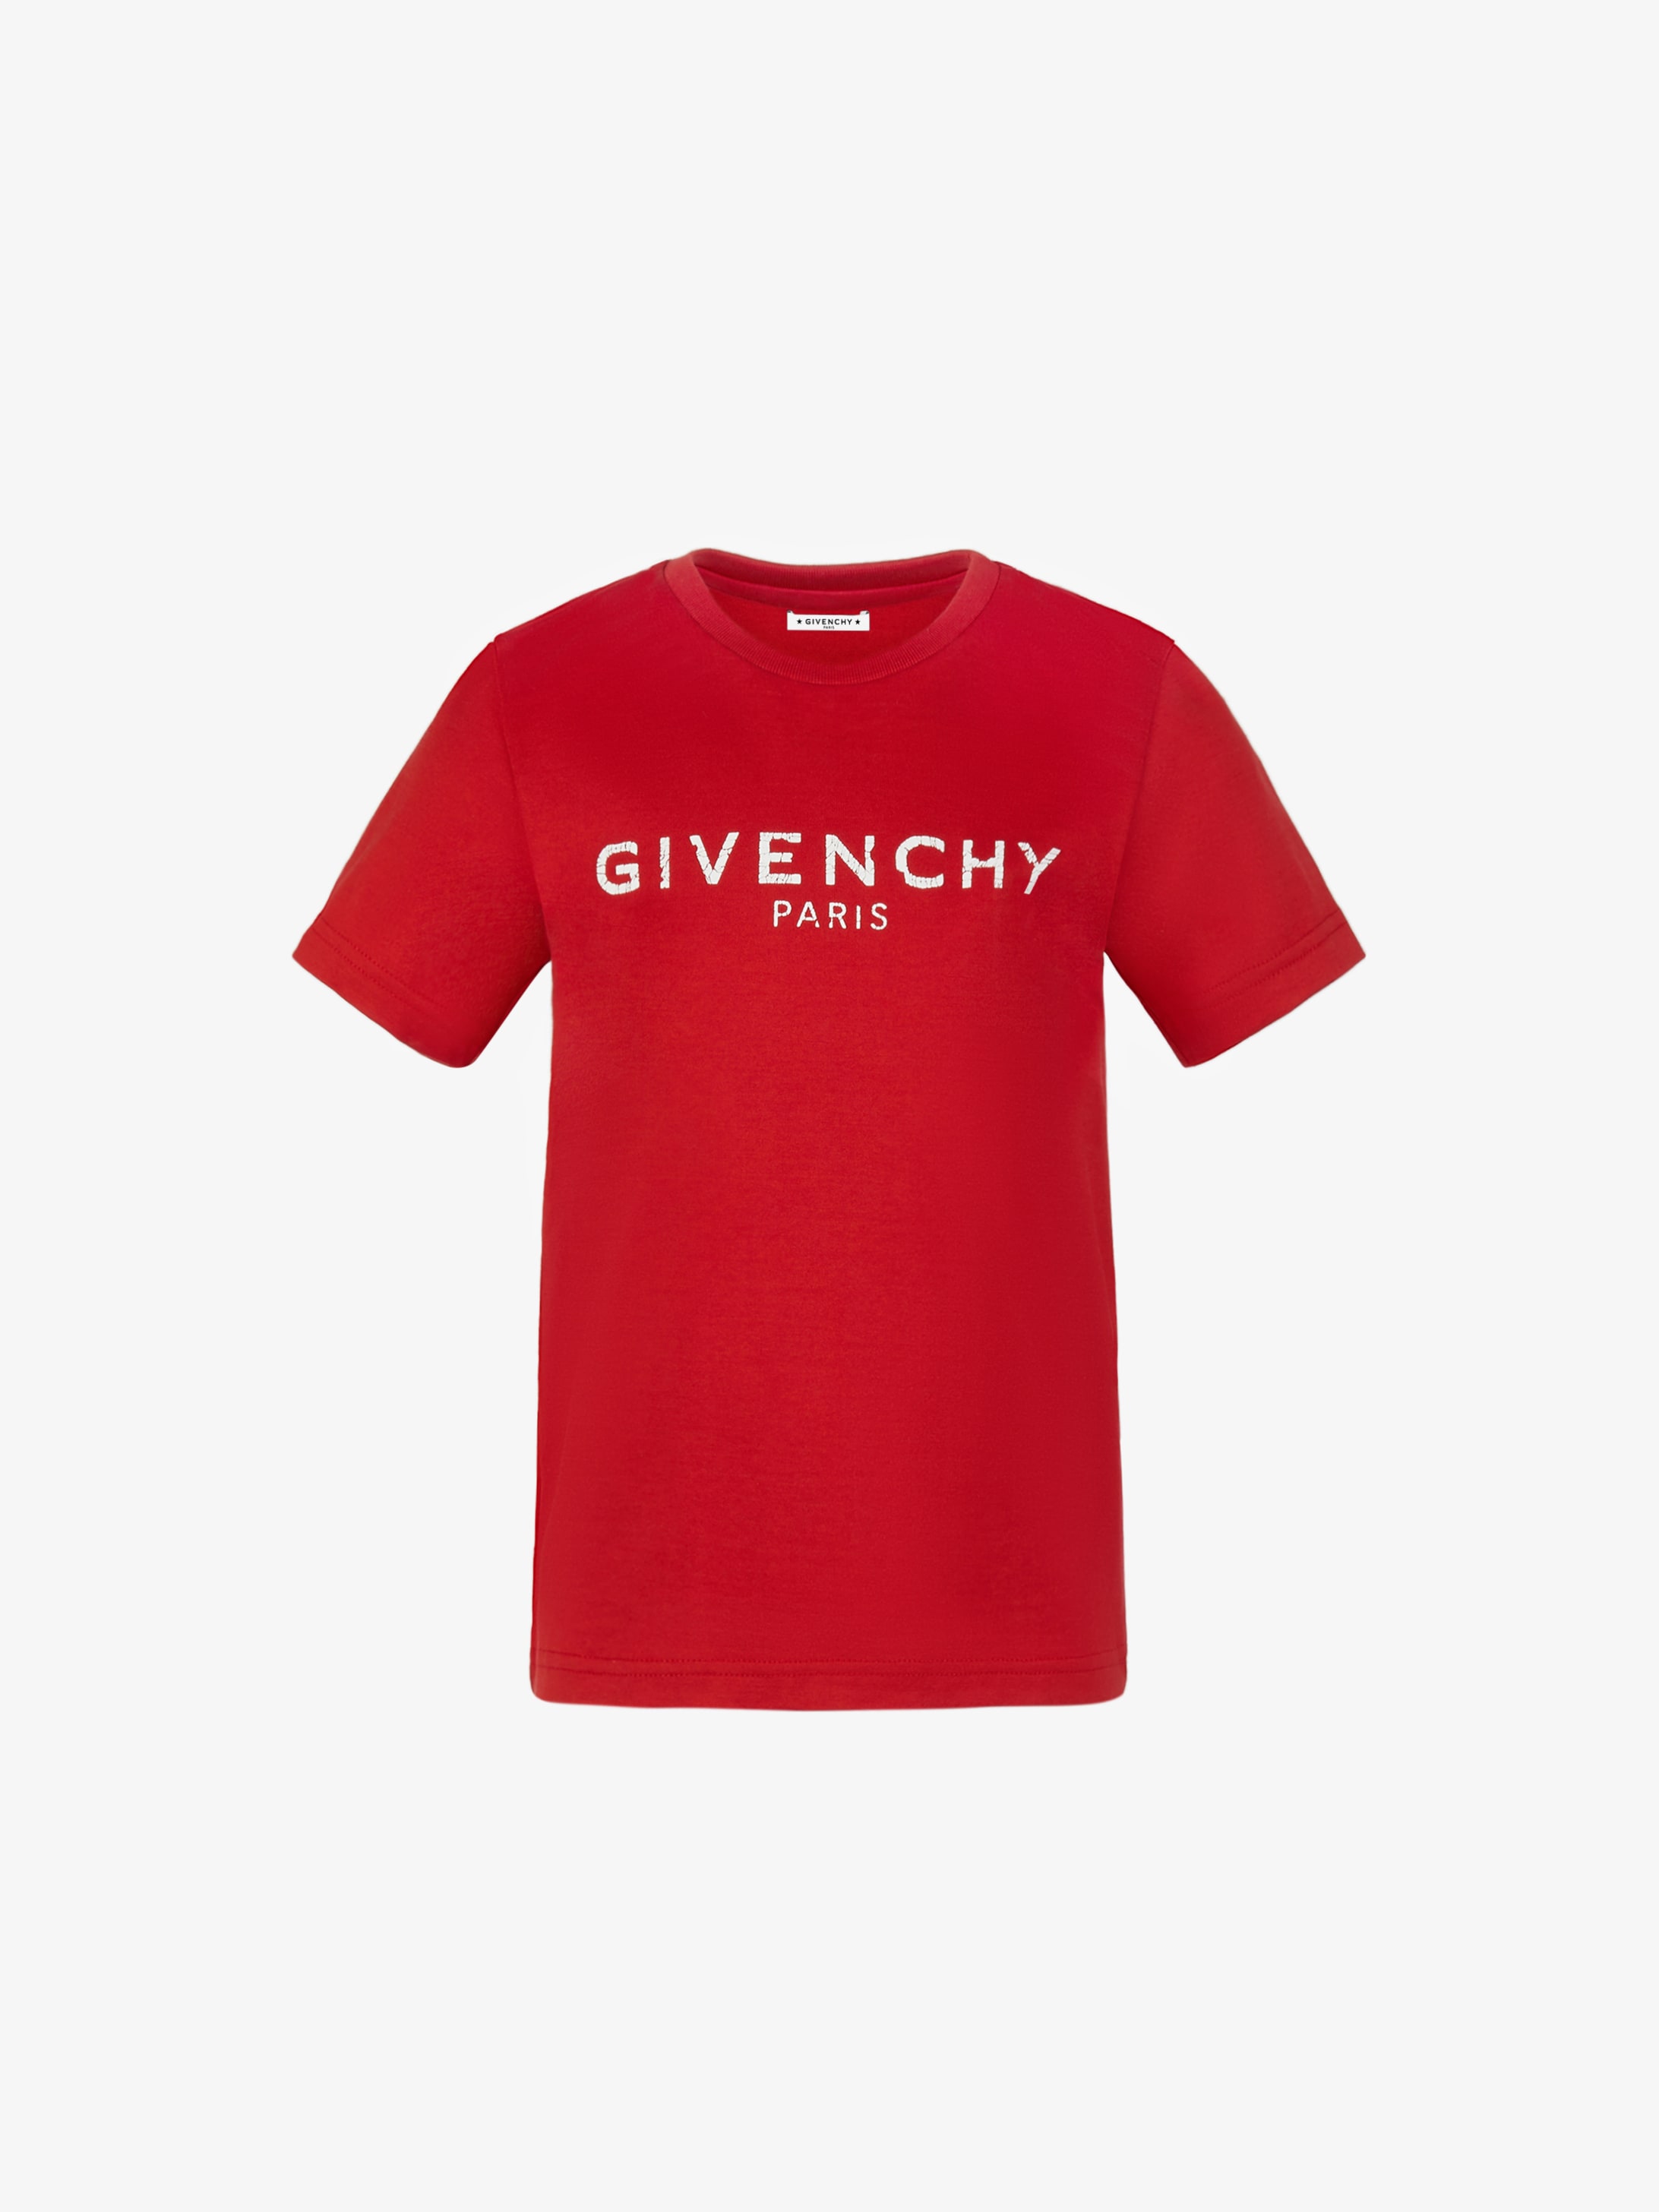 givenchy t shirt red